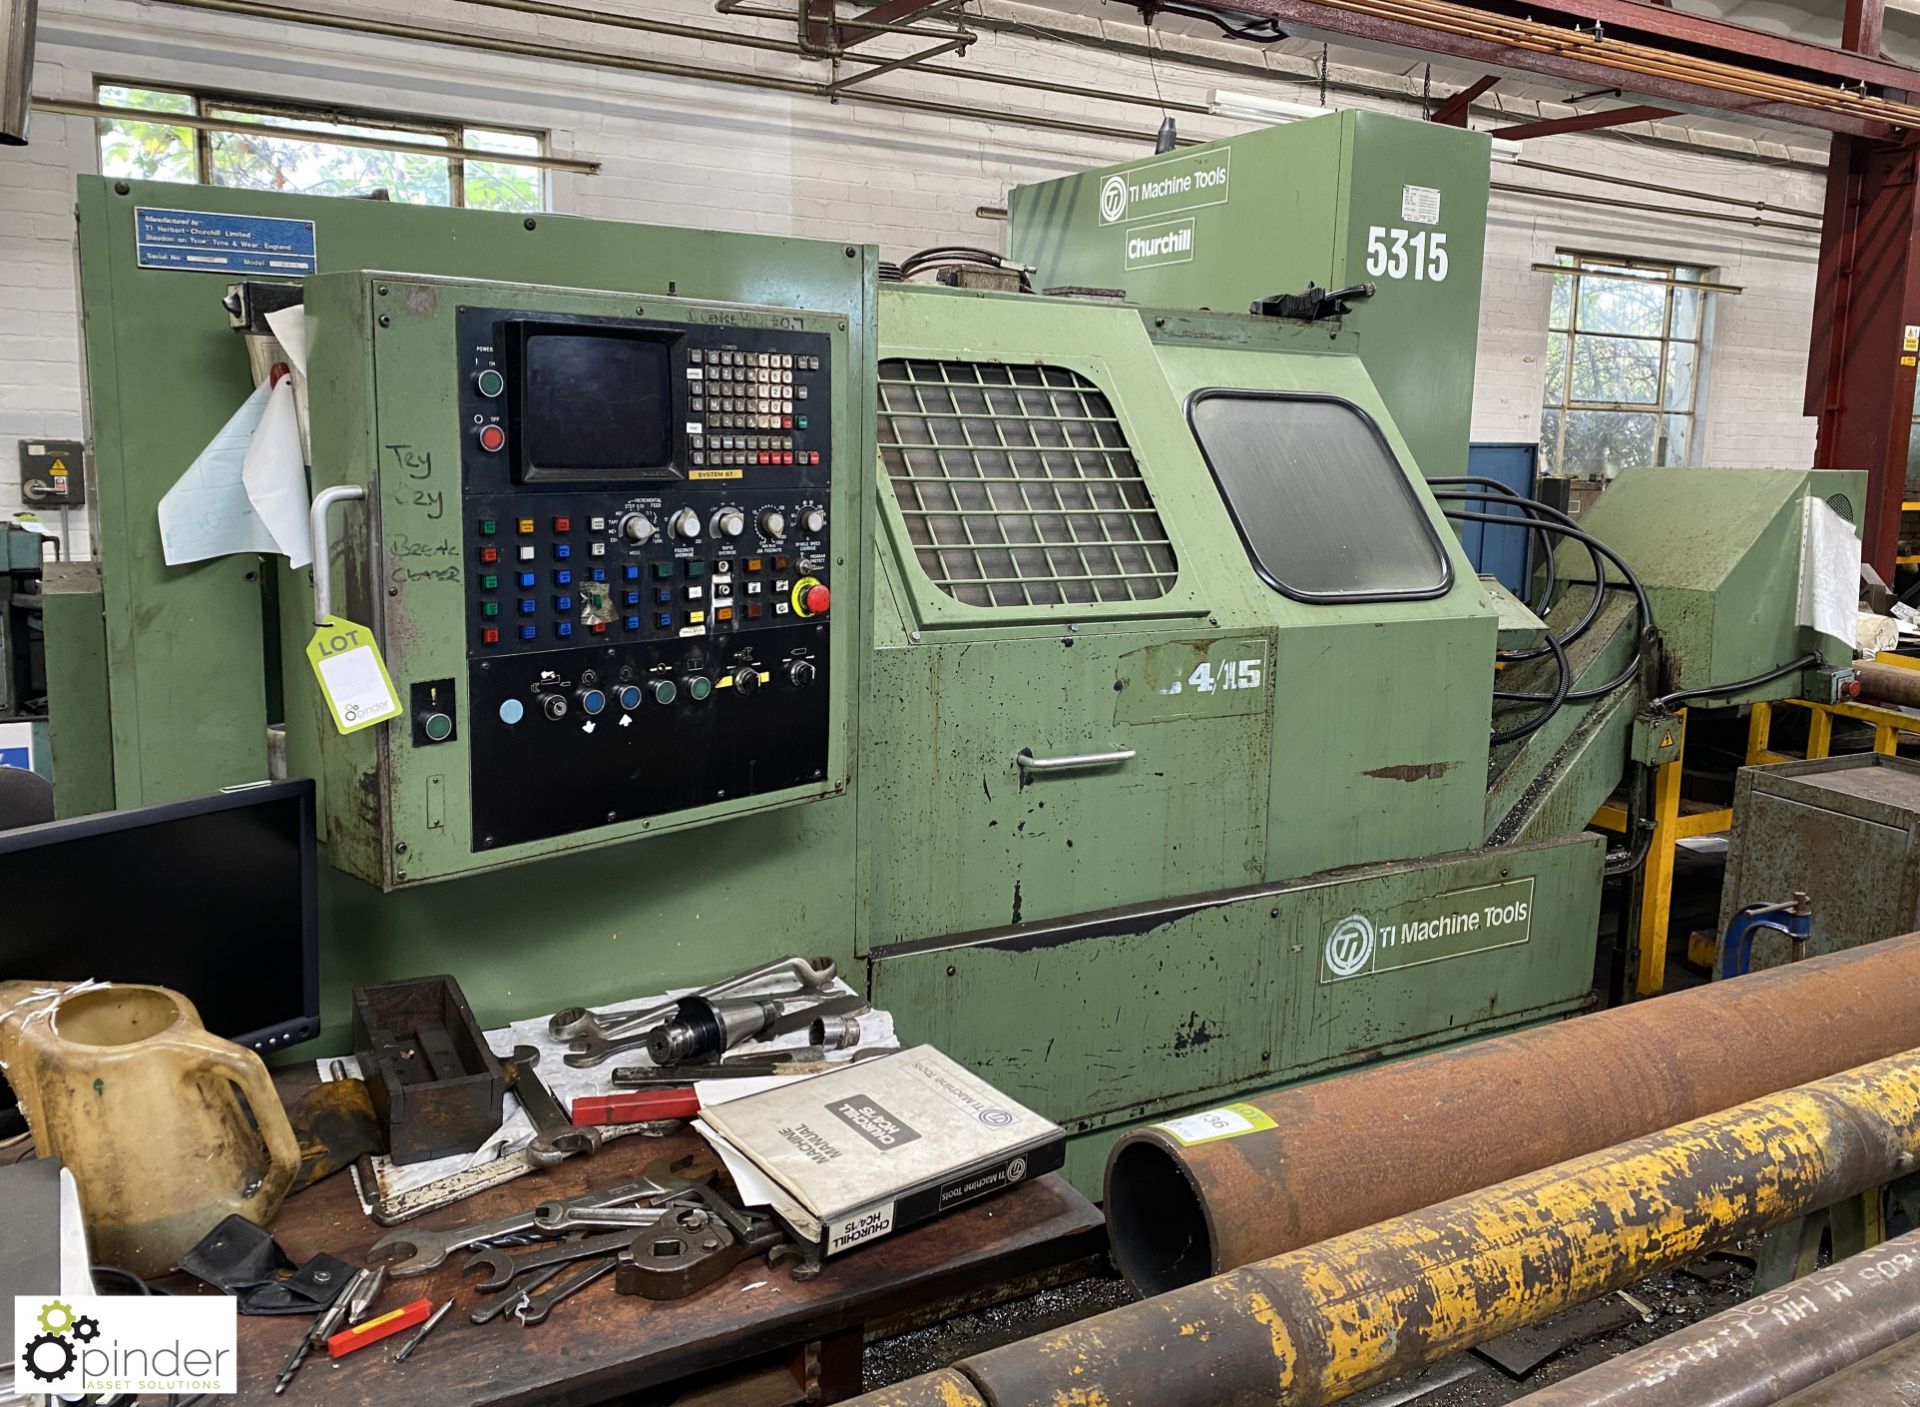 Churchill HC4/15 CNC slant bed Lathe, with Fanuc system 6T control, serial number 20187 and - Image 16 of 20